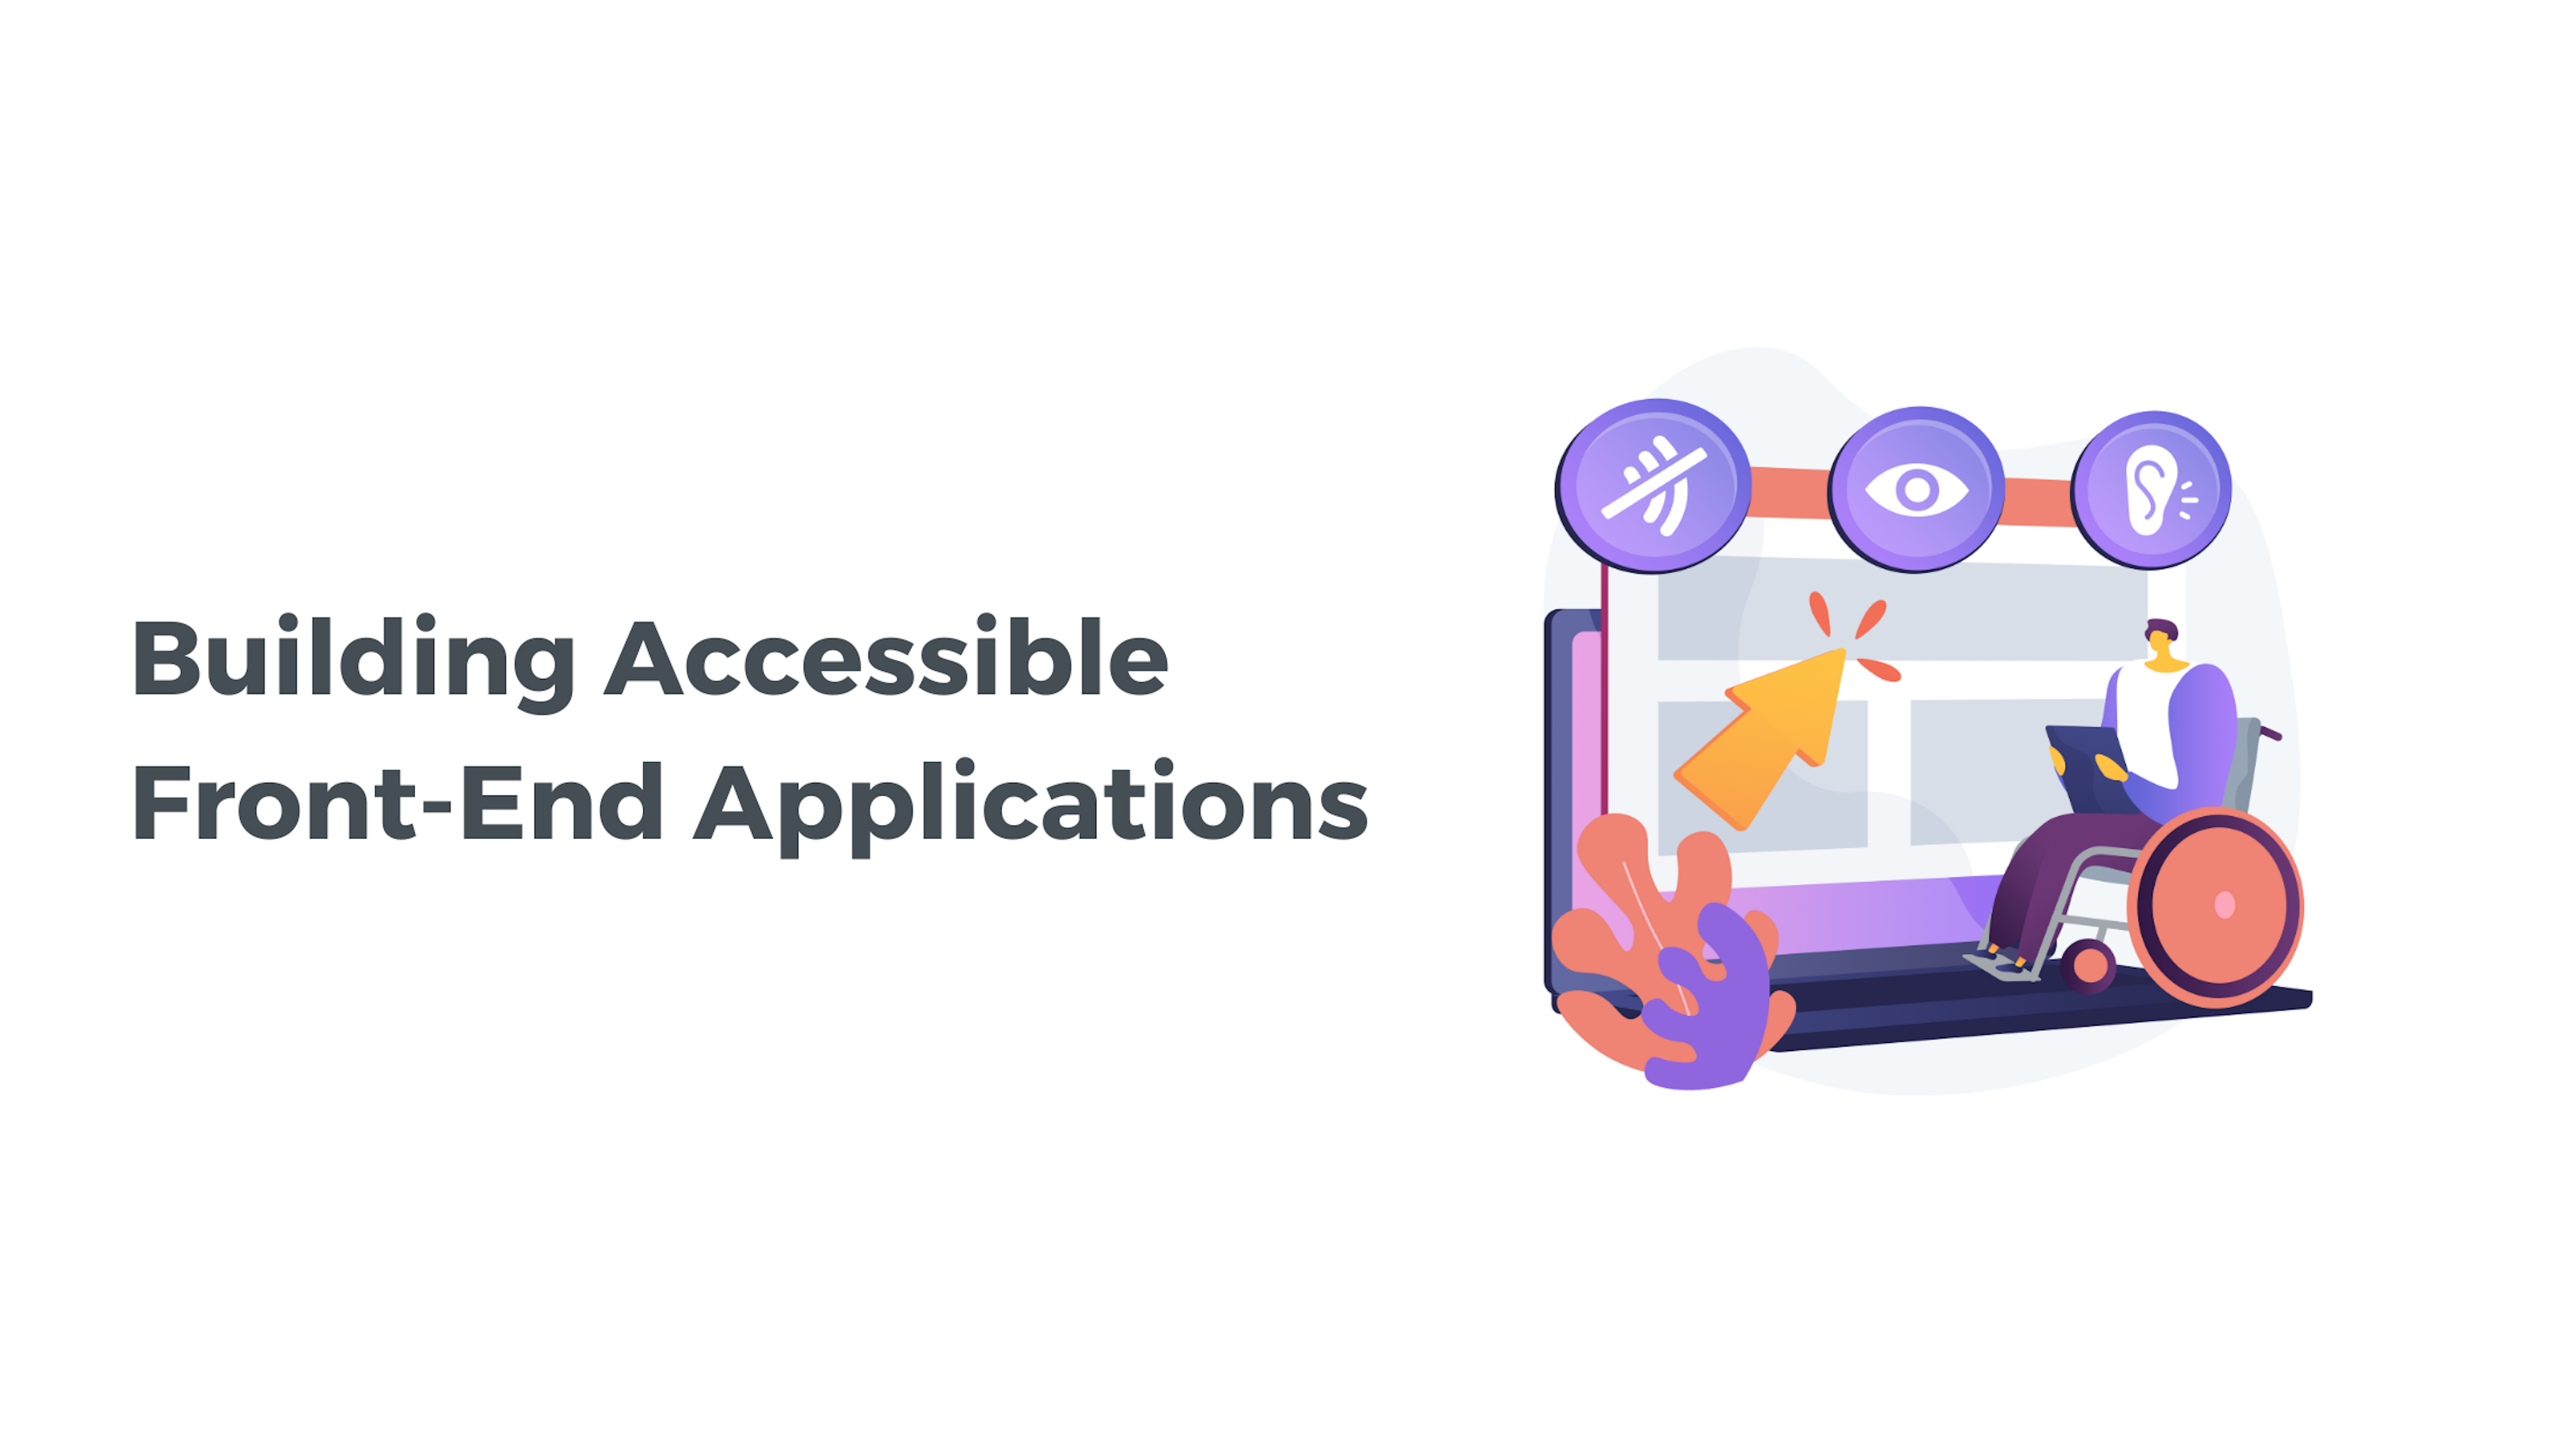 Building Accessible Front-End Applications